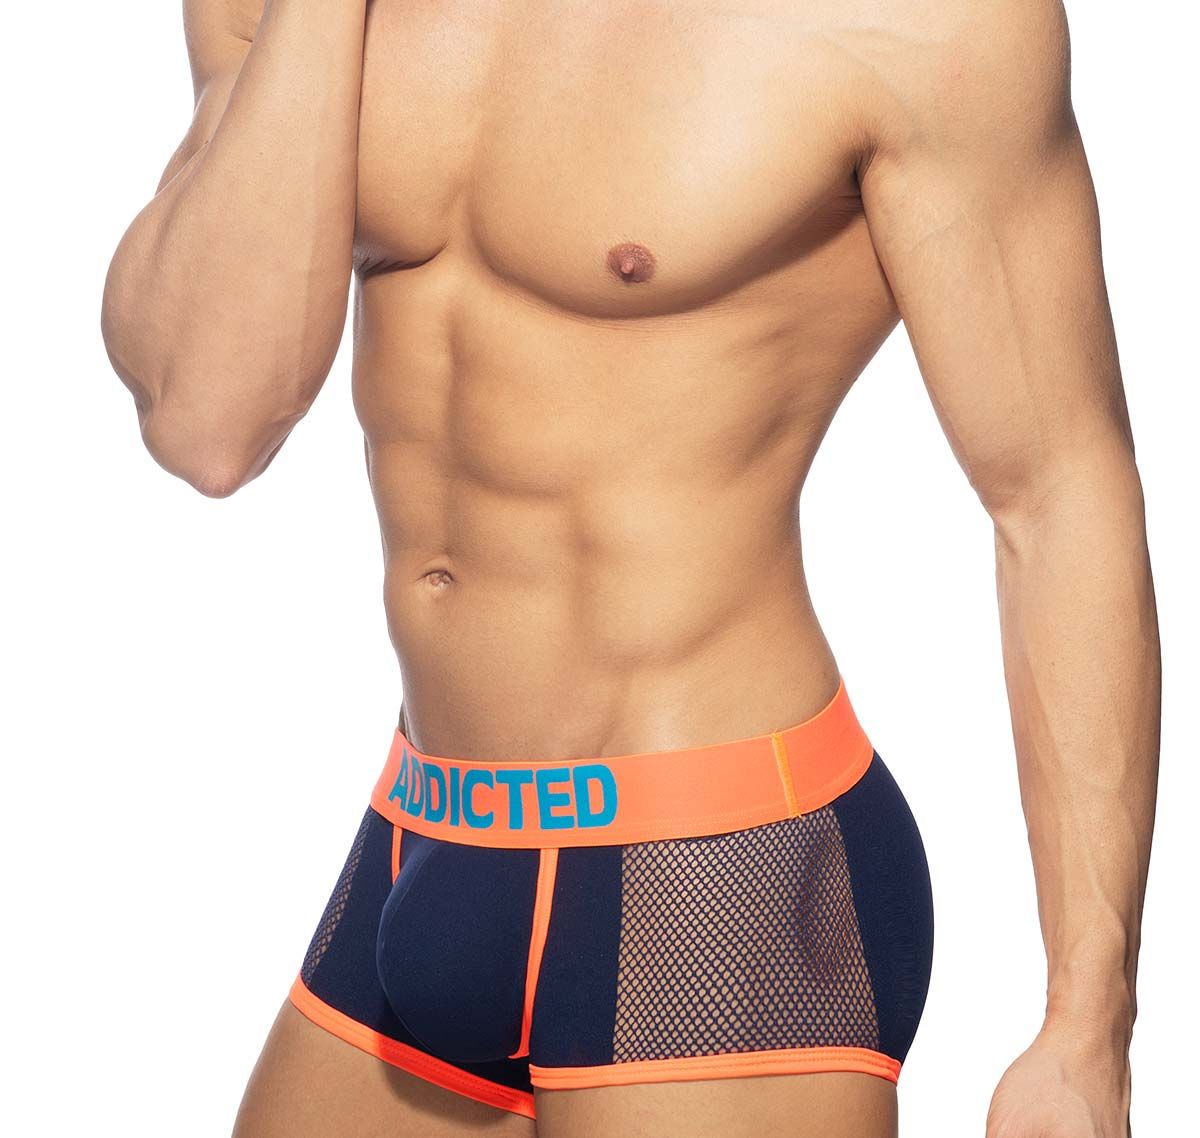 Addicted Boxers NEON MESH TRUNK AD1219, navy